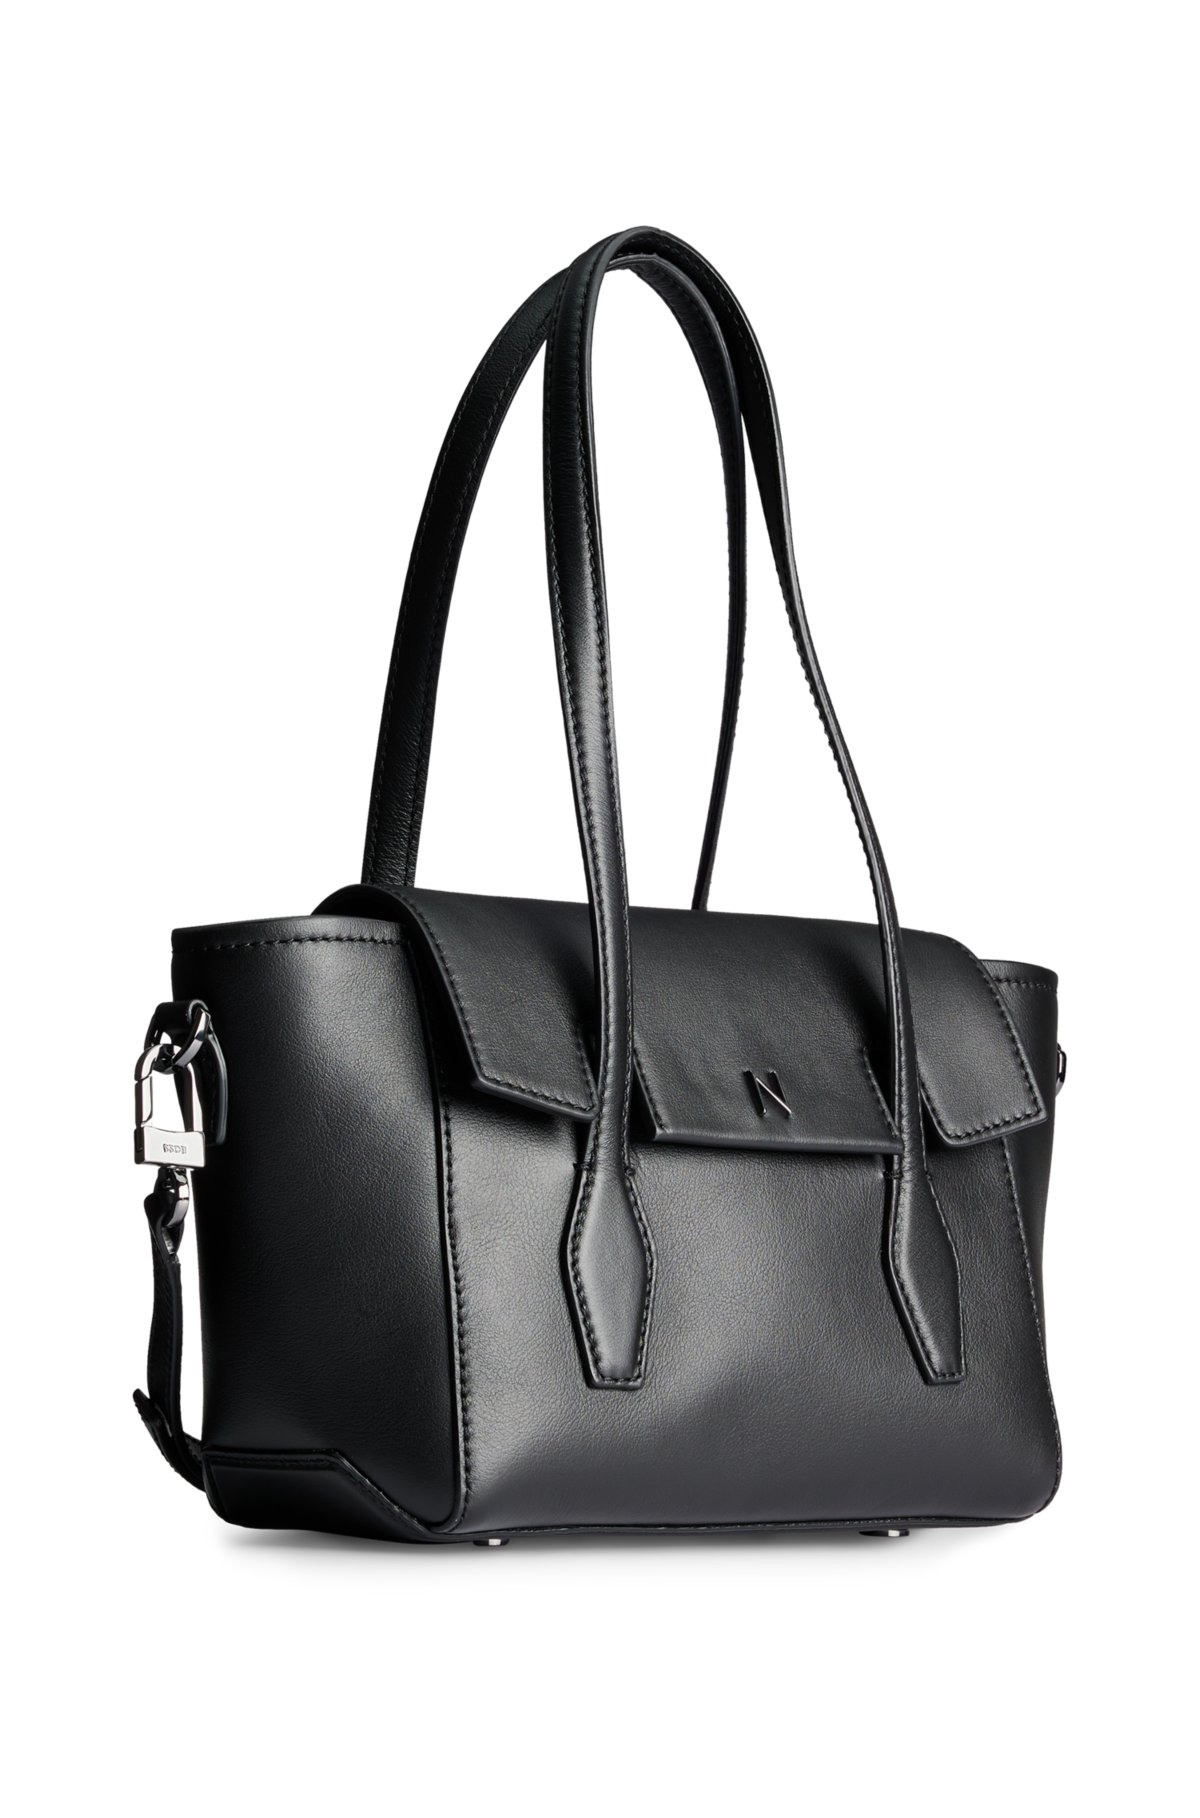 NAOMI x BOSS leather tote bag with branded trims, Black